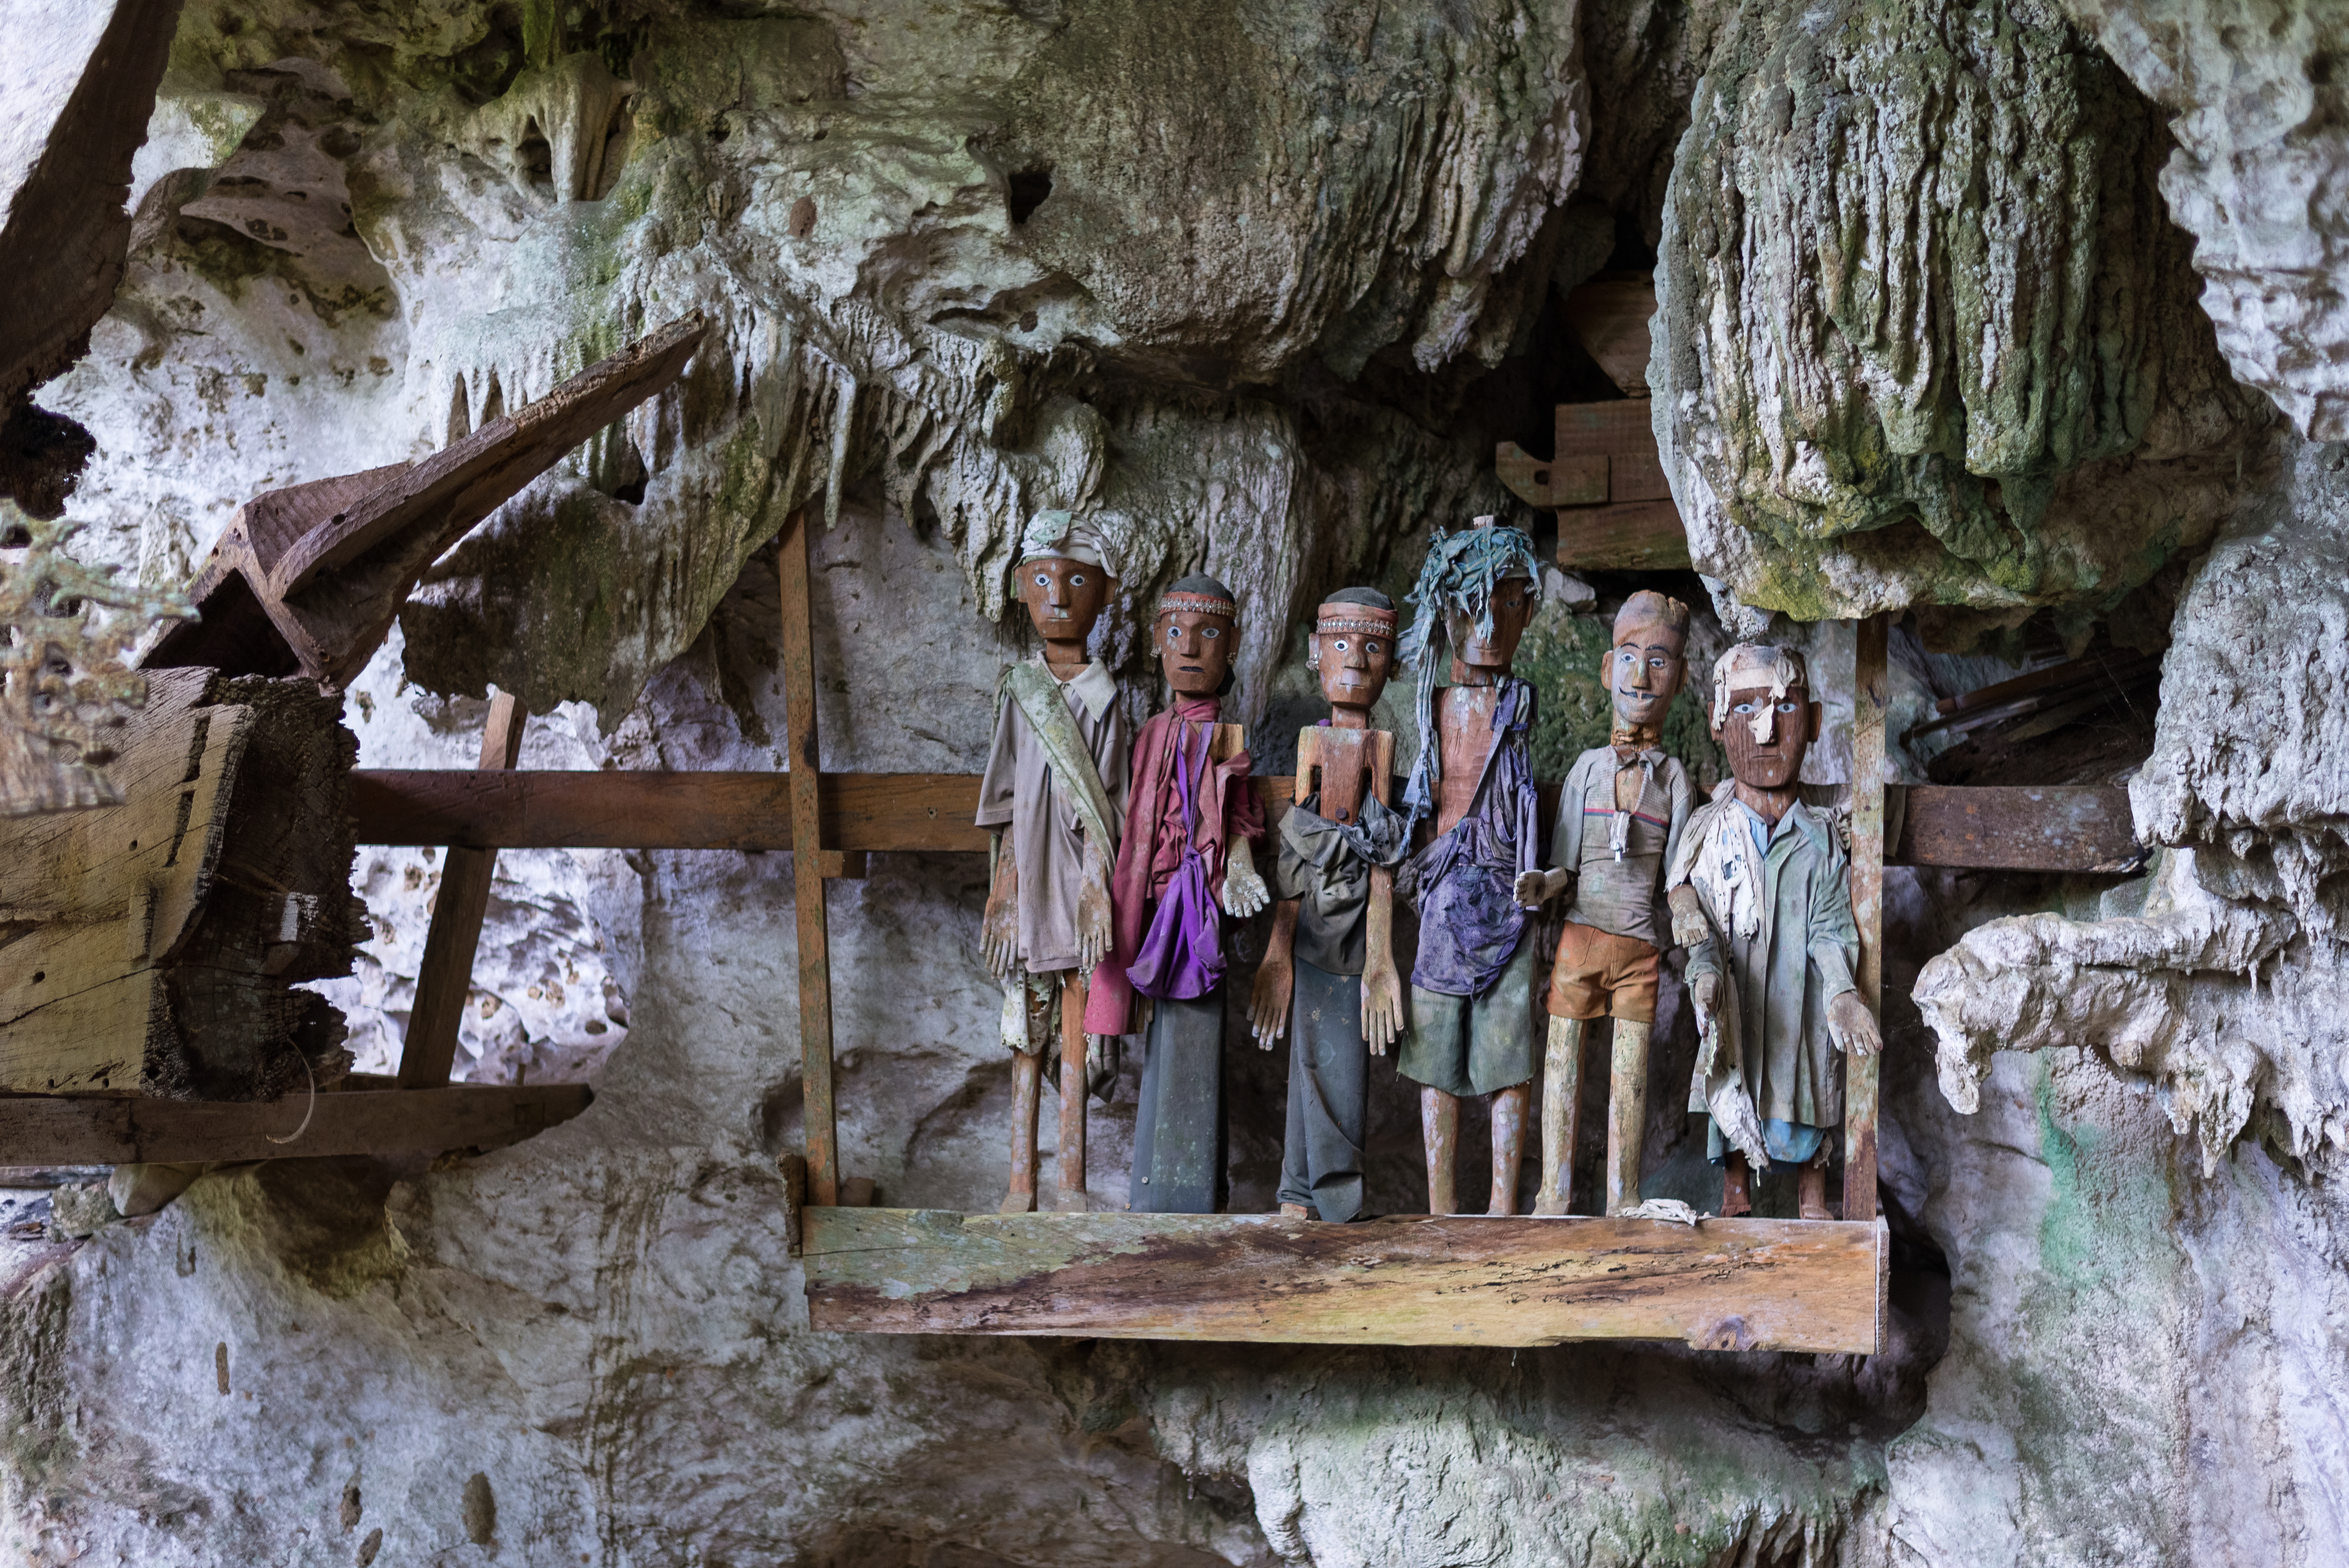 Row of dressed wood statues (called tau tau in local language) on a balcony inside the fascinating cave of the traditional burial site at Tampangallo, Tana Toraja, South Sulawesi, Indonesia.